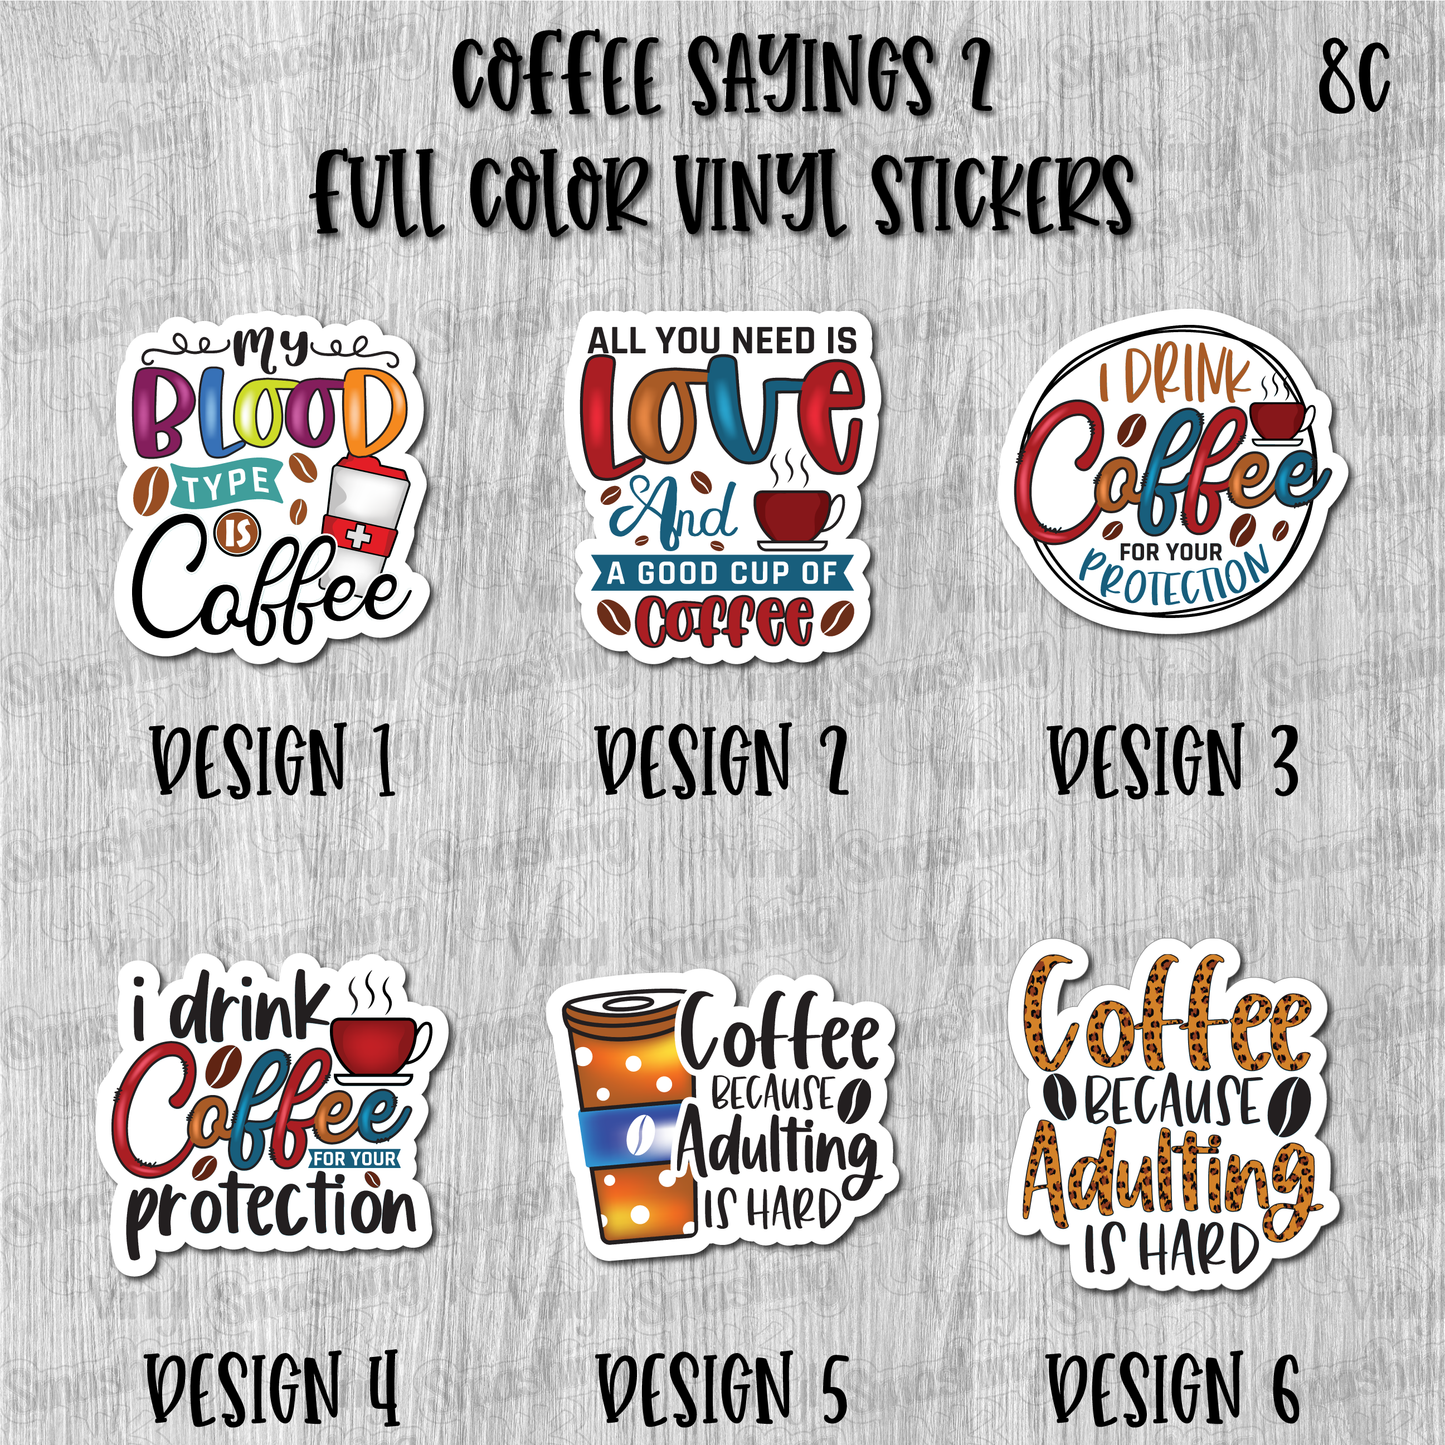 Coffee Sayings 2 - Full Color Vinyl Stickers (SHIPS IN 3-7 BUS DAYS)